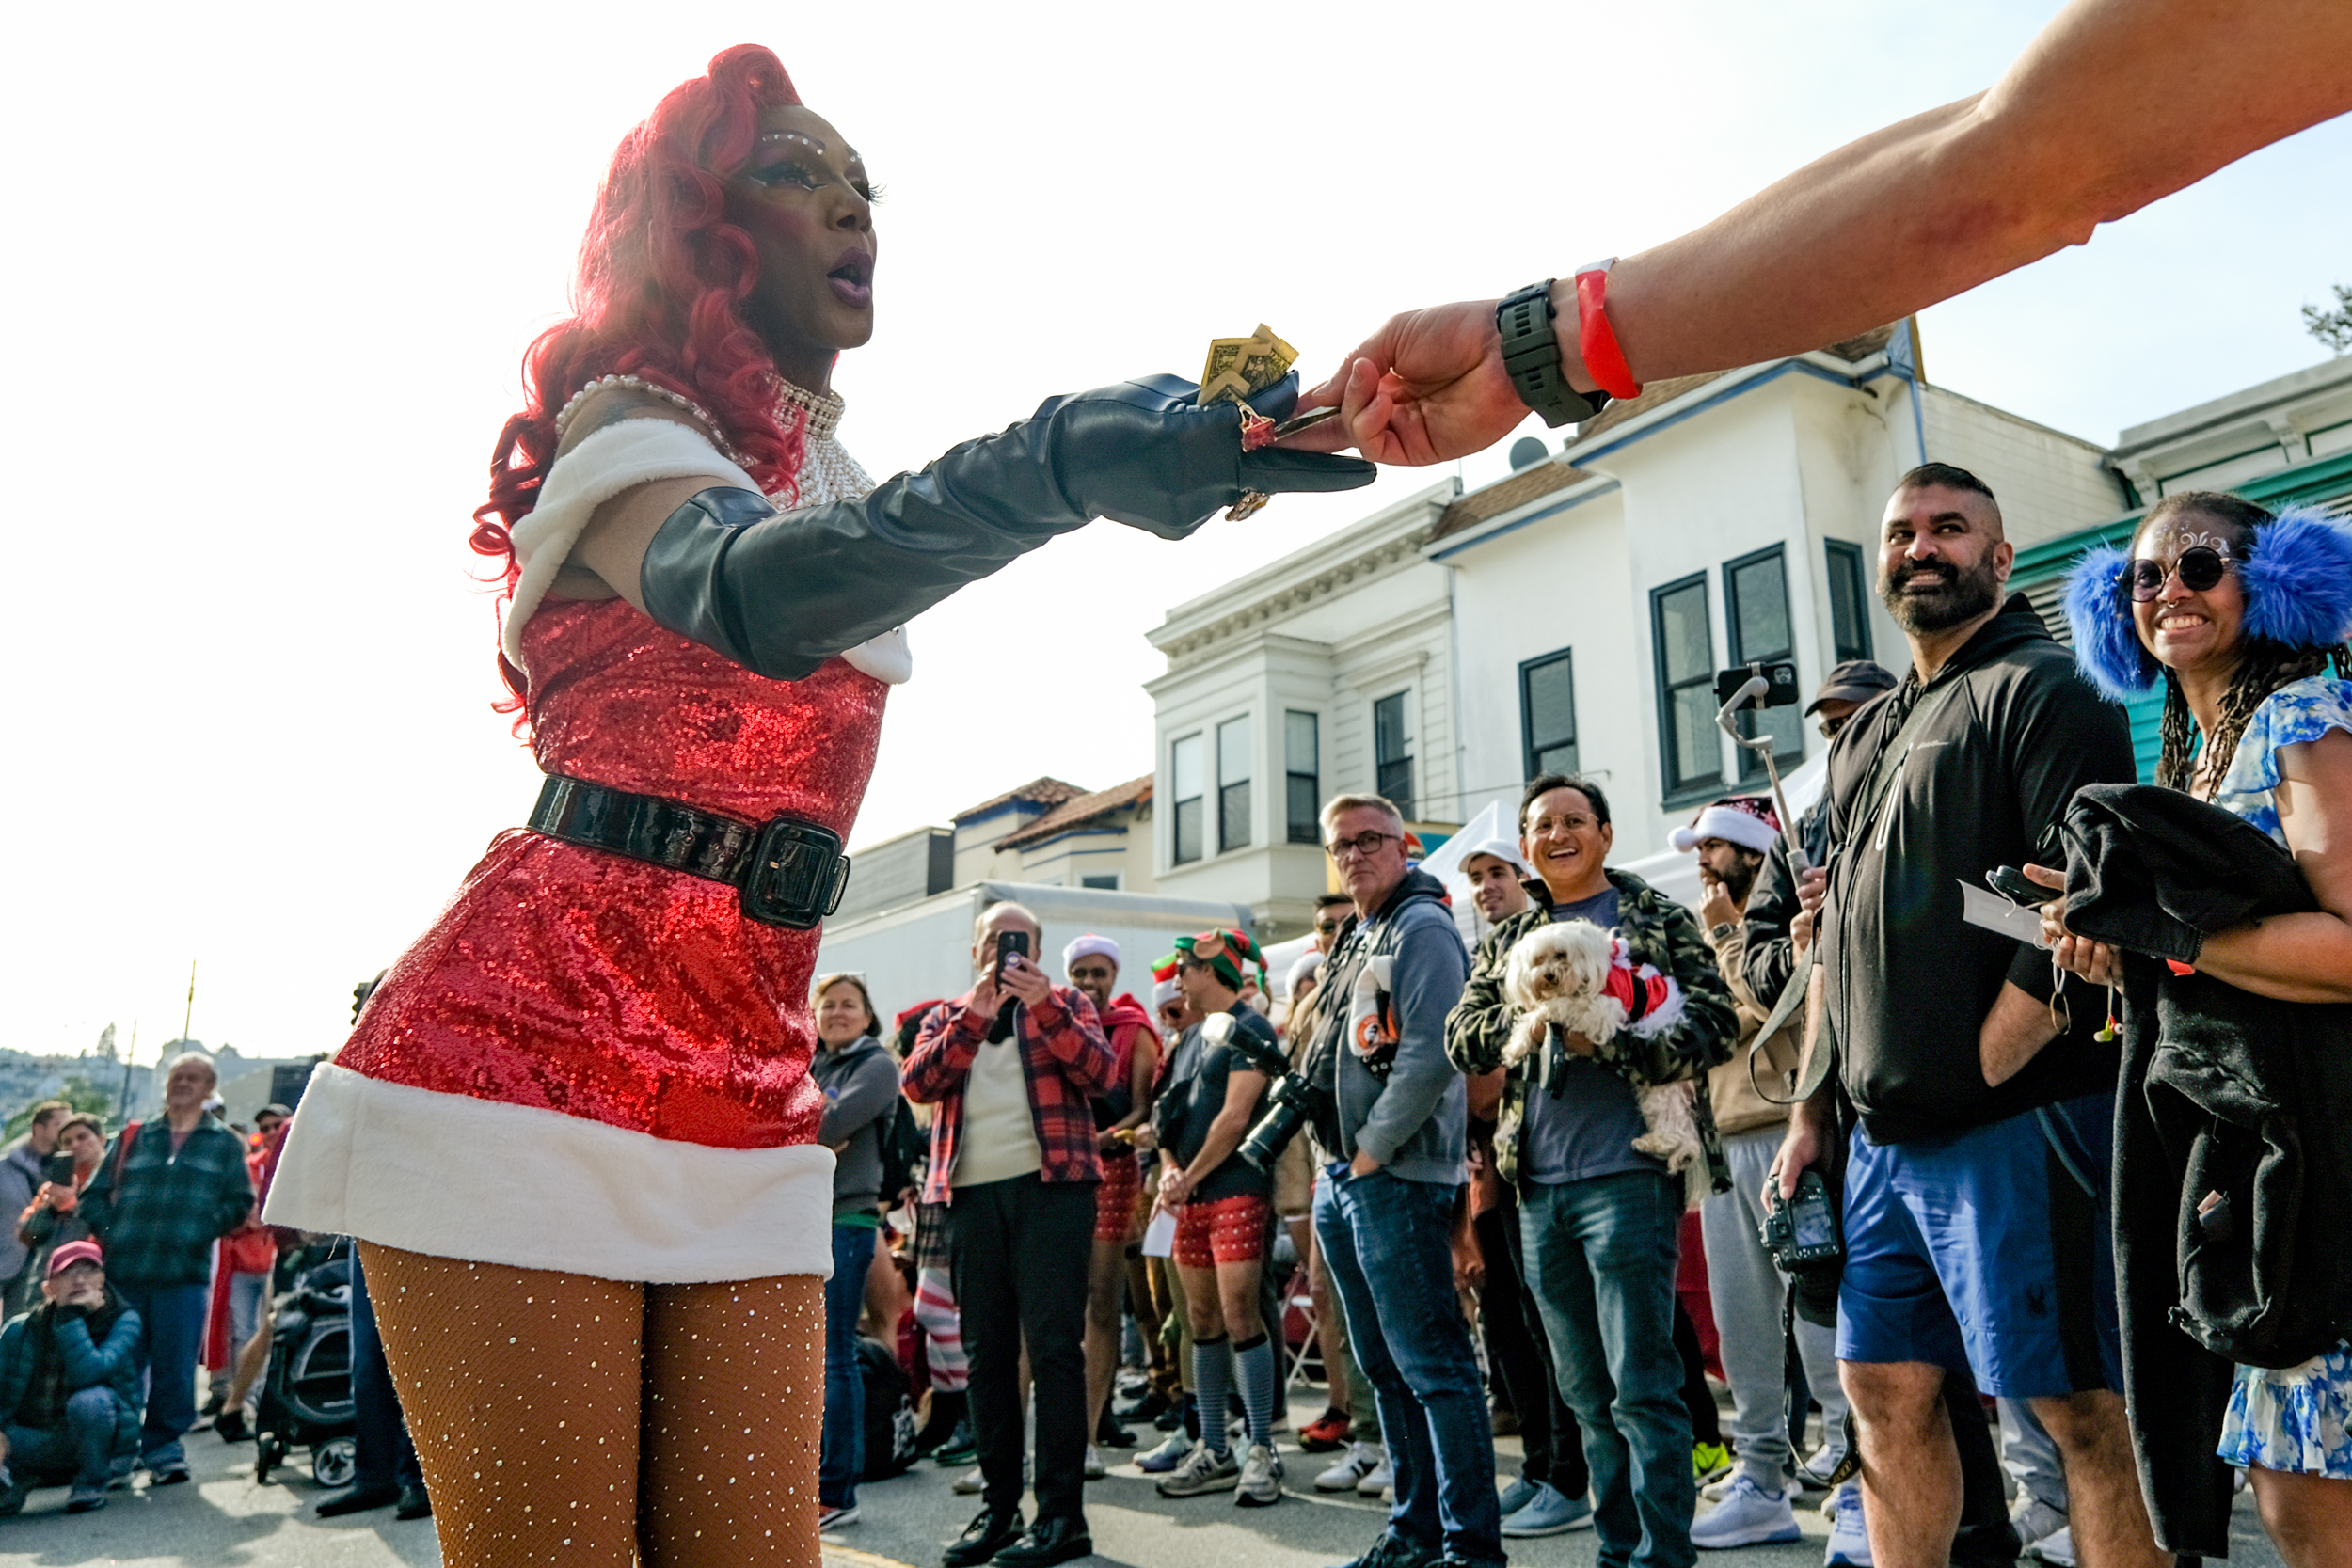 A person dressed in a Santa's outfit talks with people before an underwear fun run